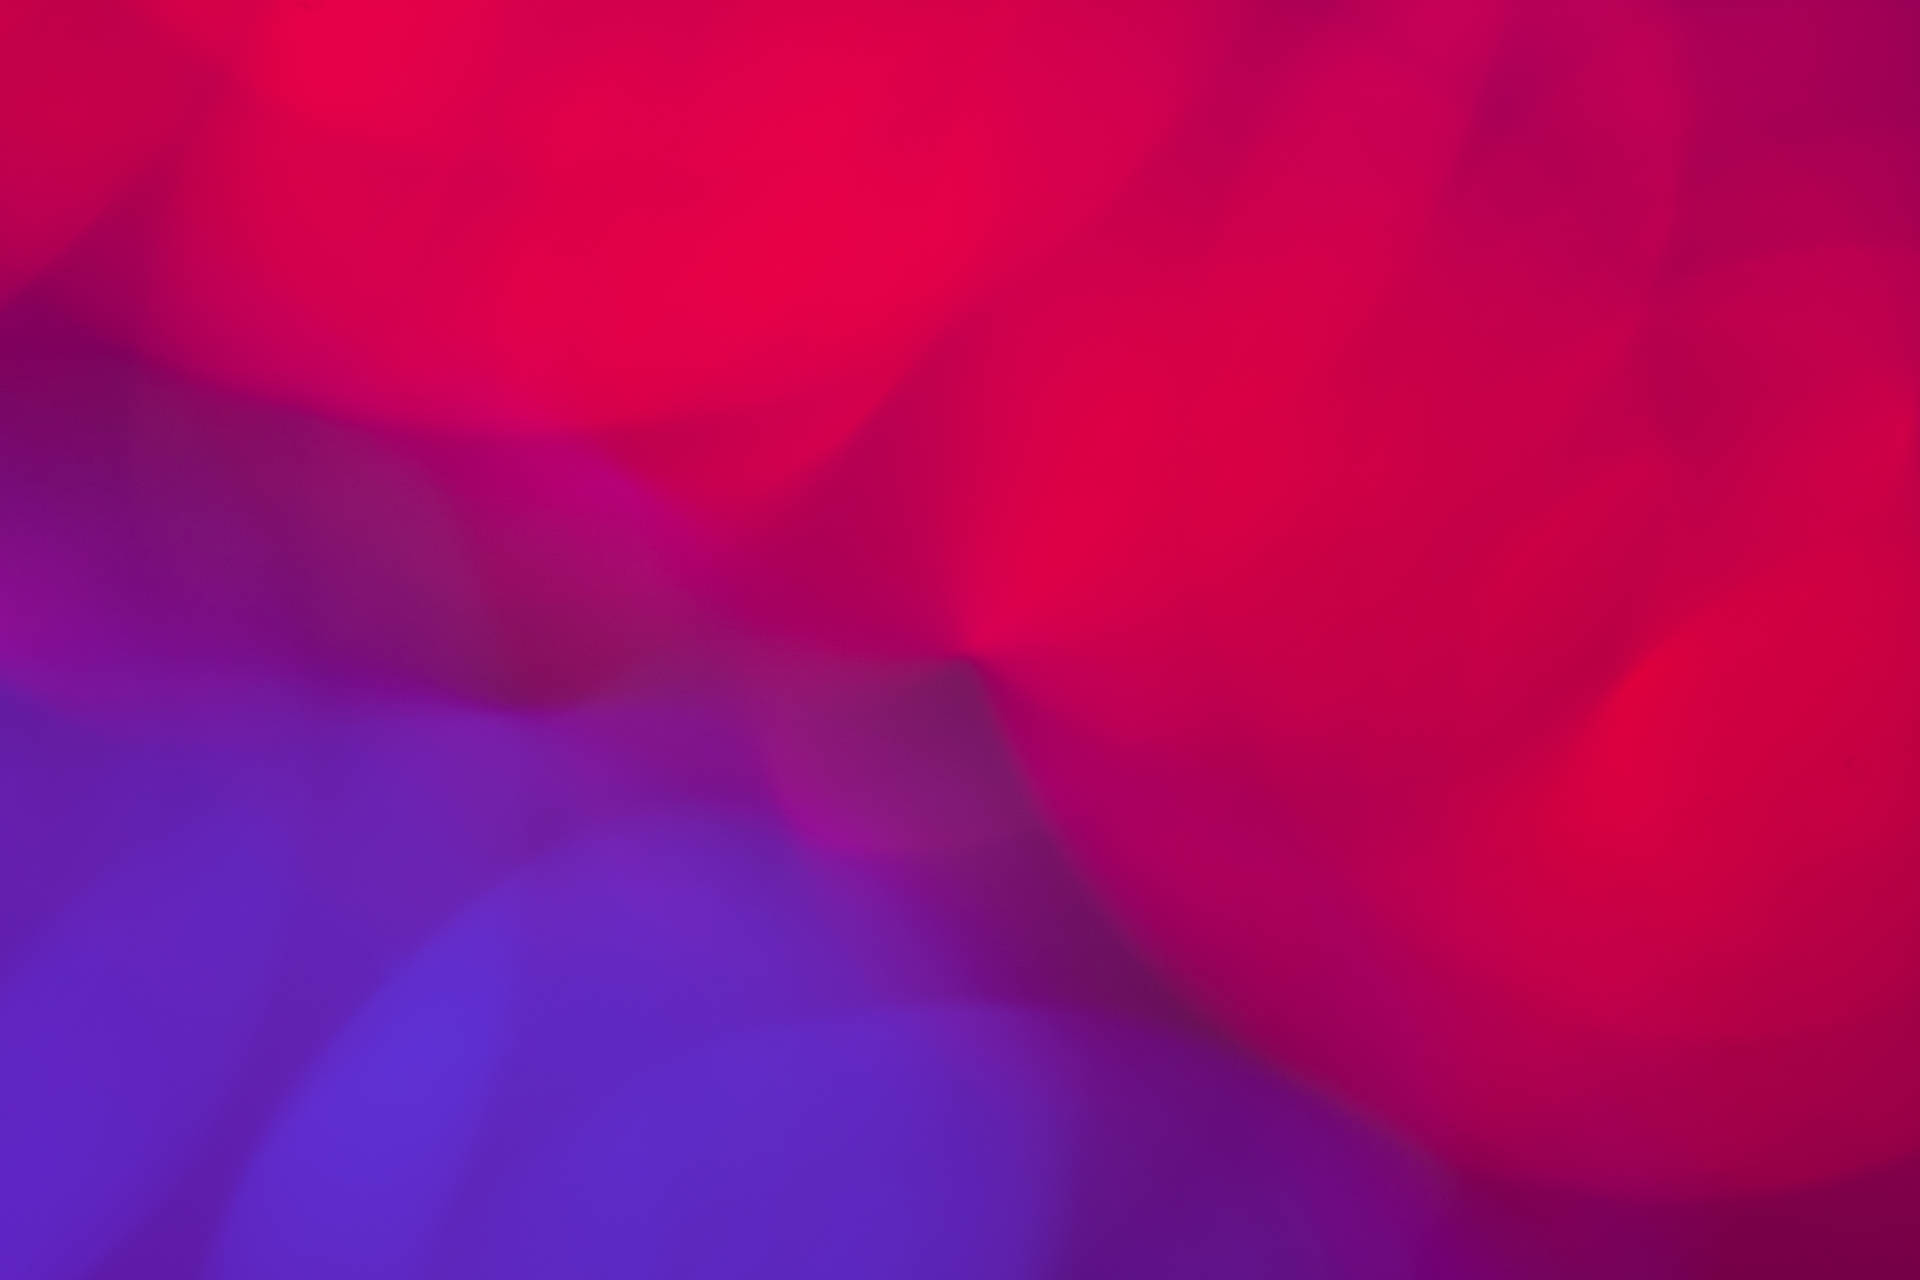 Light Purple And Red Blur Painting Wallpaper